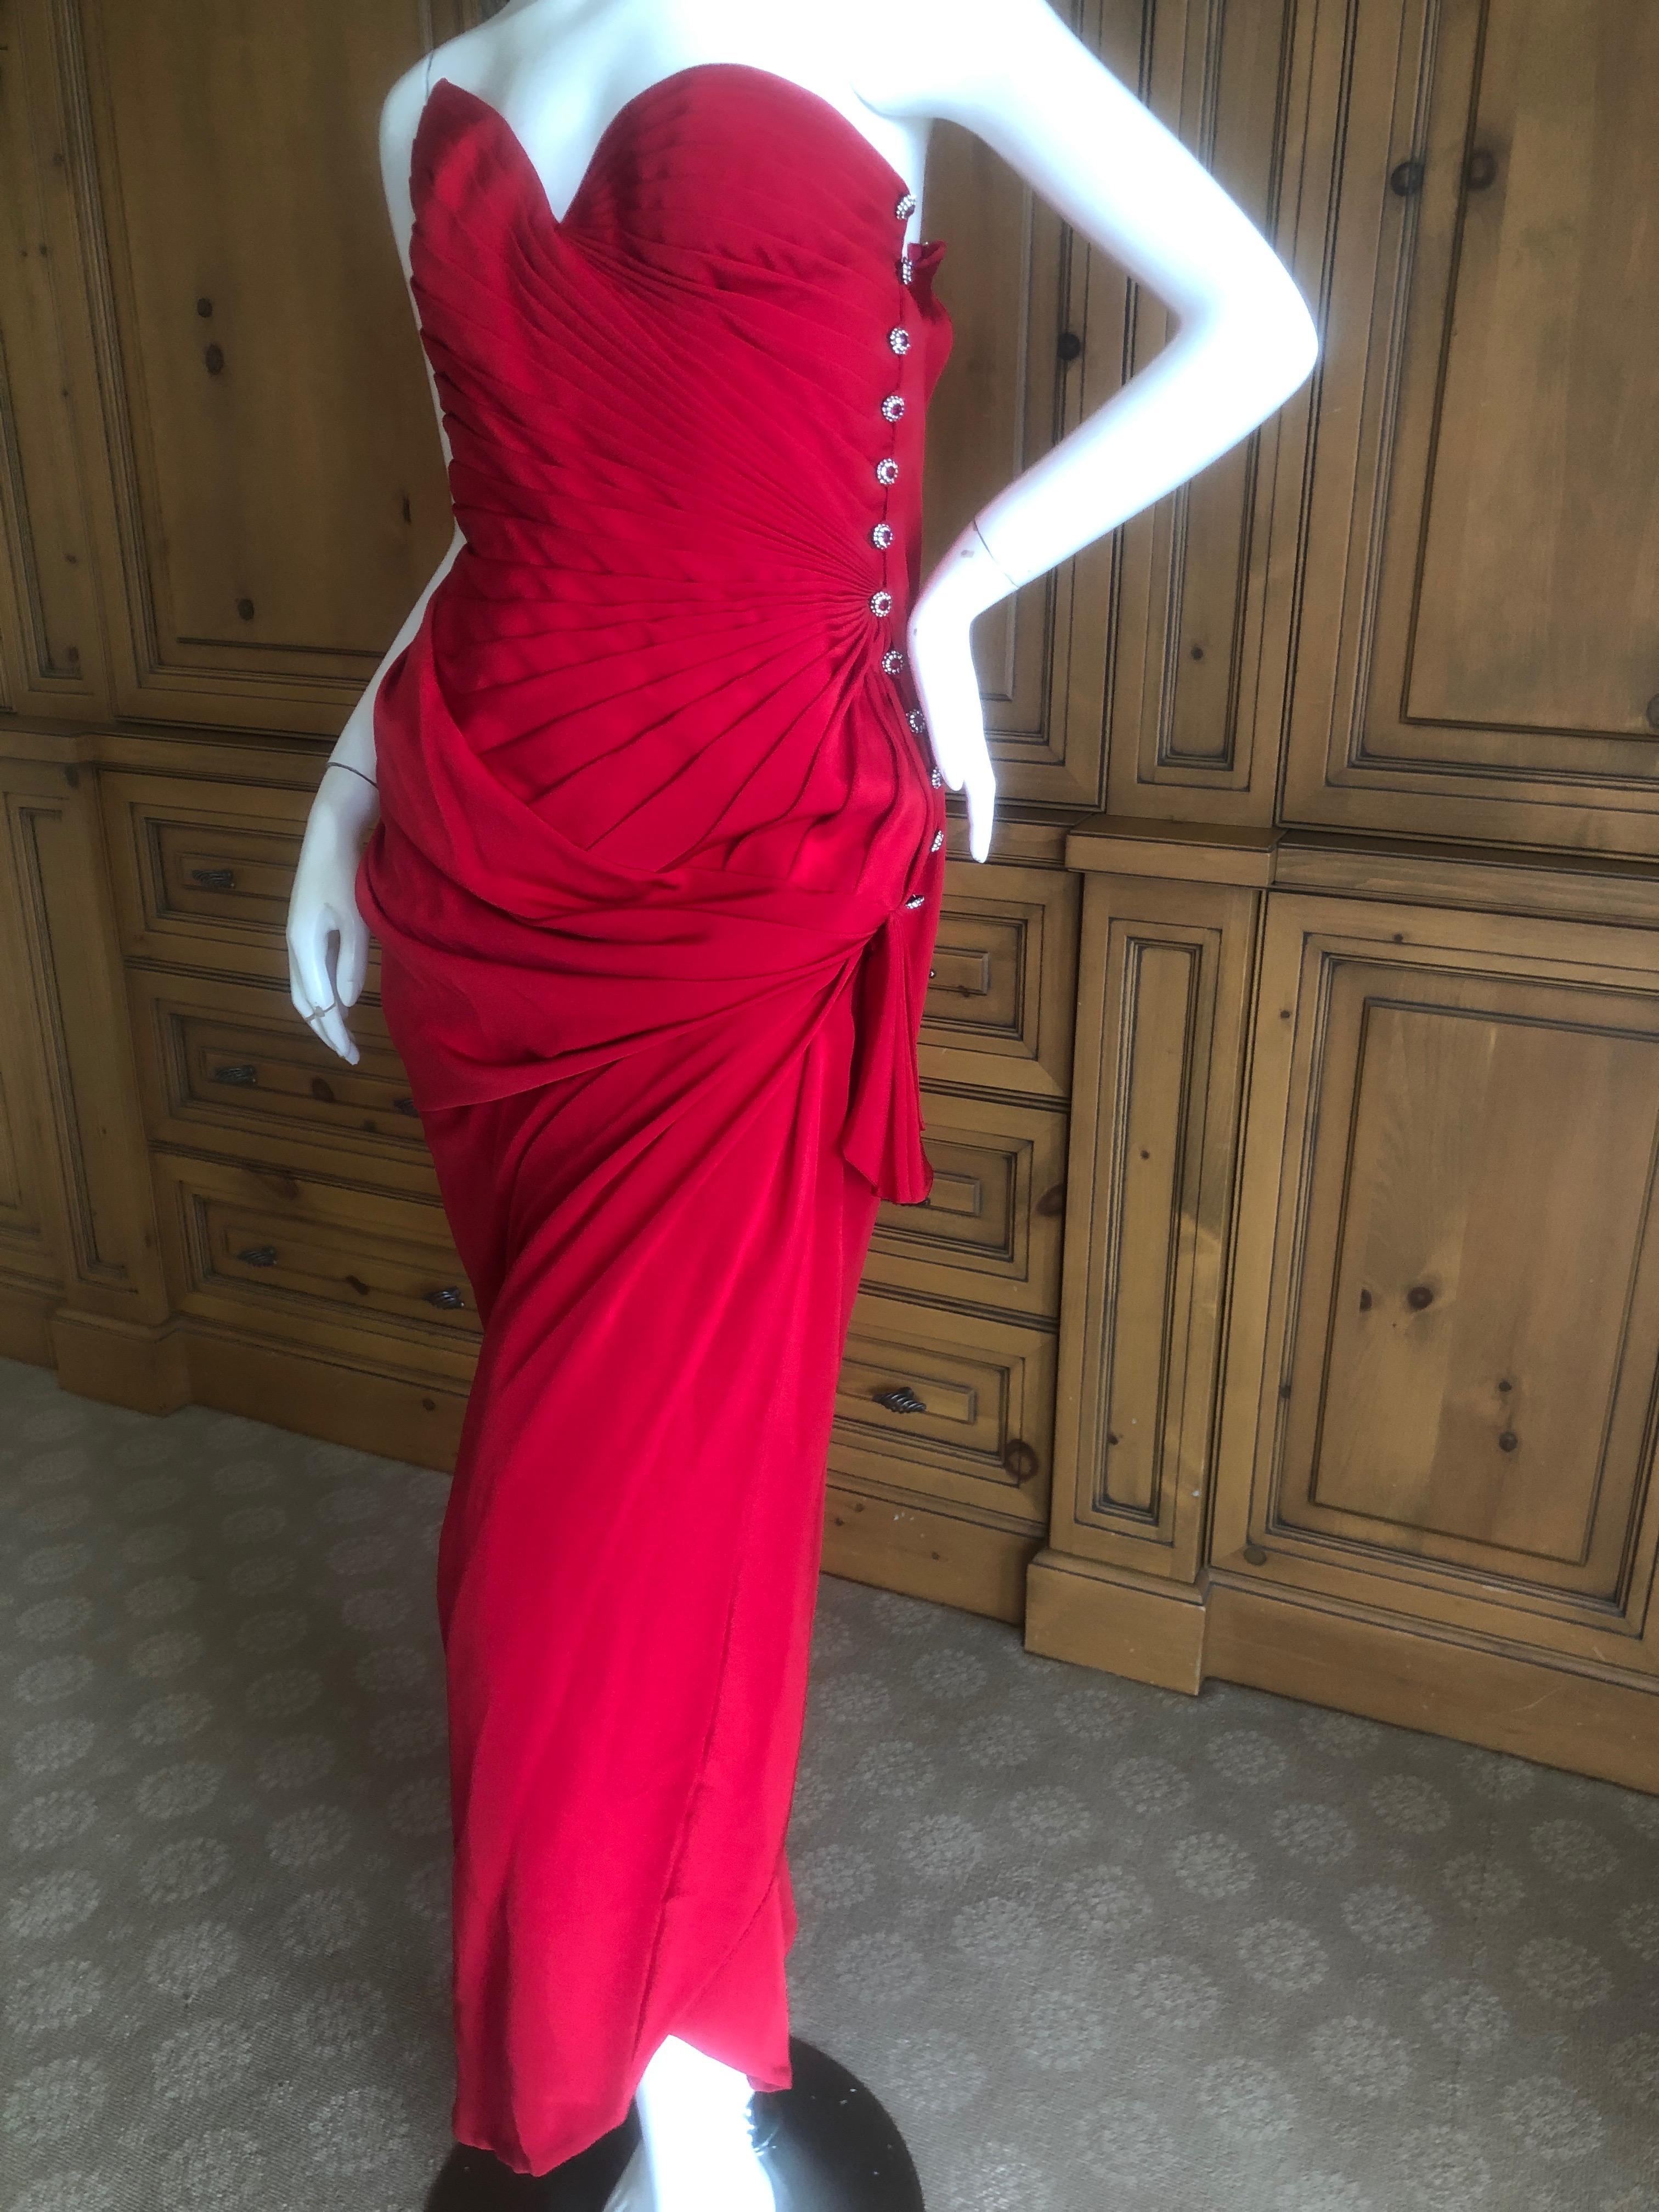 Emanuel Ungaro Numbered Haute Couture Fall 1984 Red  Strapless Evening Dress 1